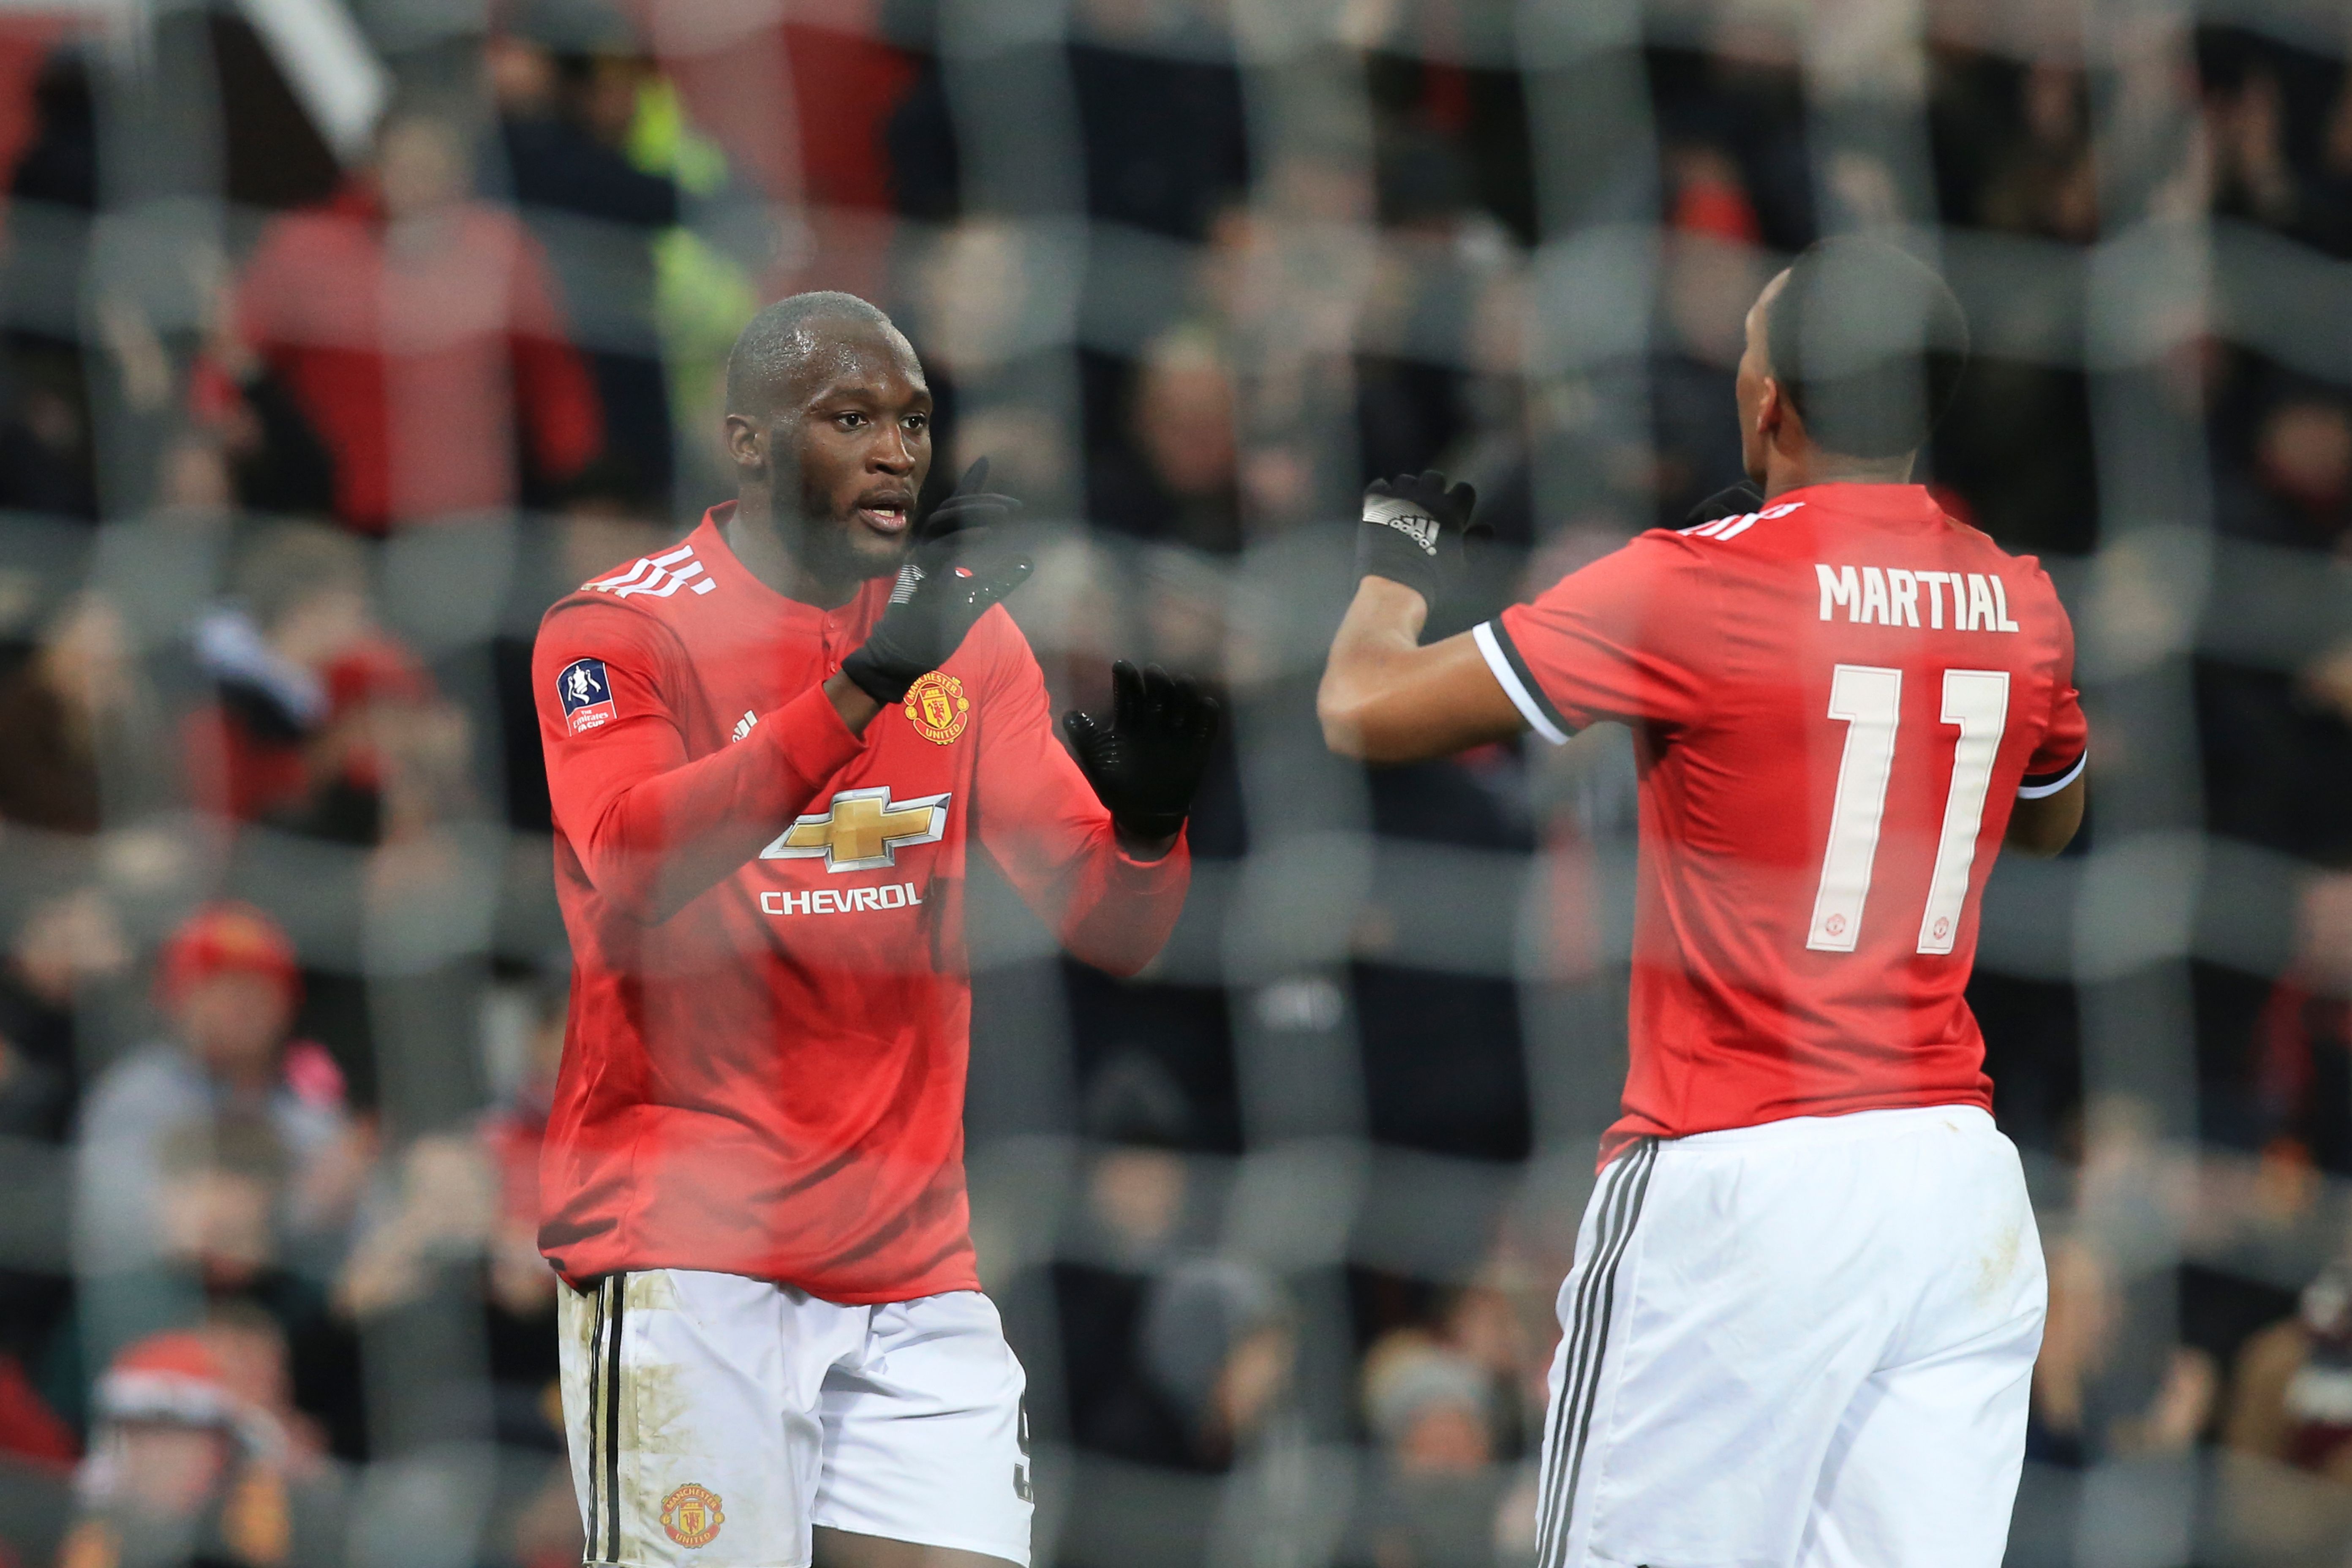 Manchester United's Belgian striker Romelu Lukaku (L) celebrates scoring their second goal with Manchester United's French striker Anthony Martial (R) during the English FA Cup third round football match between Manchester United and Derby County at Old Trafford in Manchester, north west England, on January 5, 2018. / AFP PHOTO / Lindsey PARNABY / RESTRICTED TO EDITORIAL USE. No use with unauthorized audio, video, data, fixture lists, club/league logos or 'live' services. Online in-match use limited to 75 images, no video emulation. No use in betting, games or single club/league/player publications.  /         (Photo credit should read LINDSEY PARNABY/AFP/Getty Images)